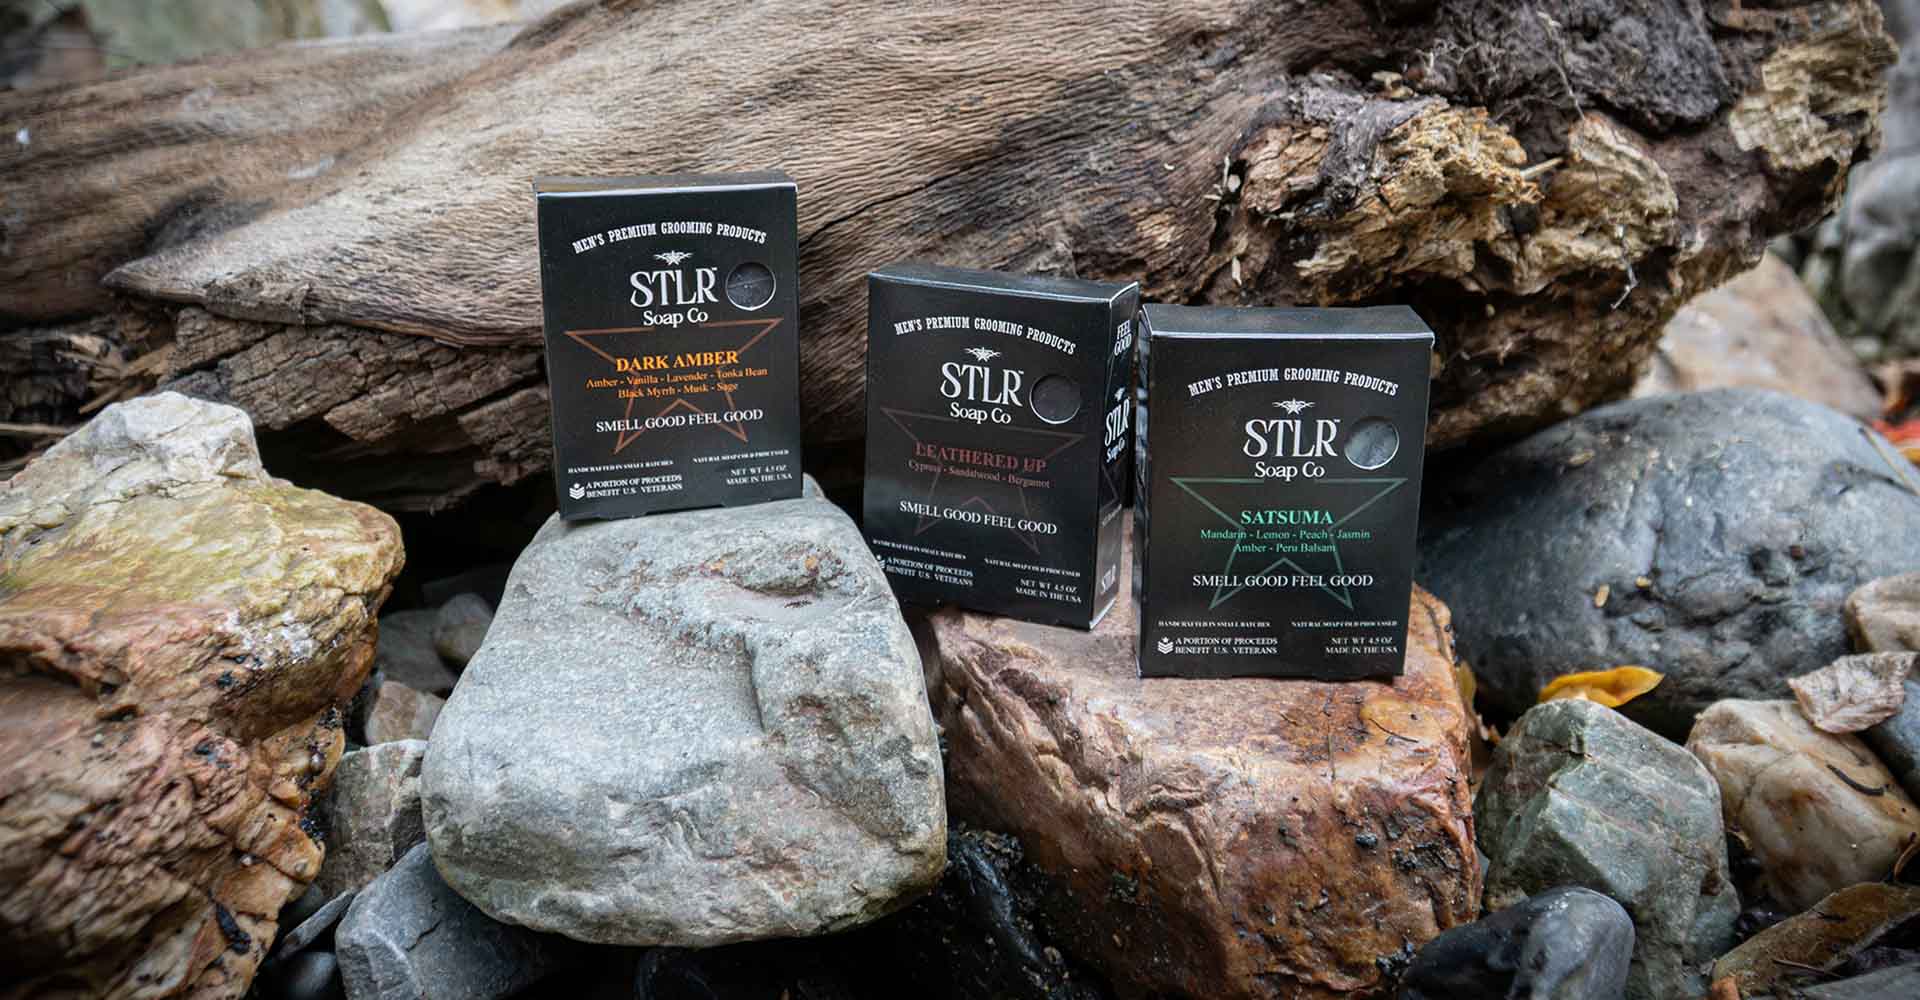 packaged soap products in natural environment with rocks and wood